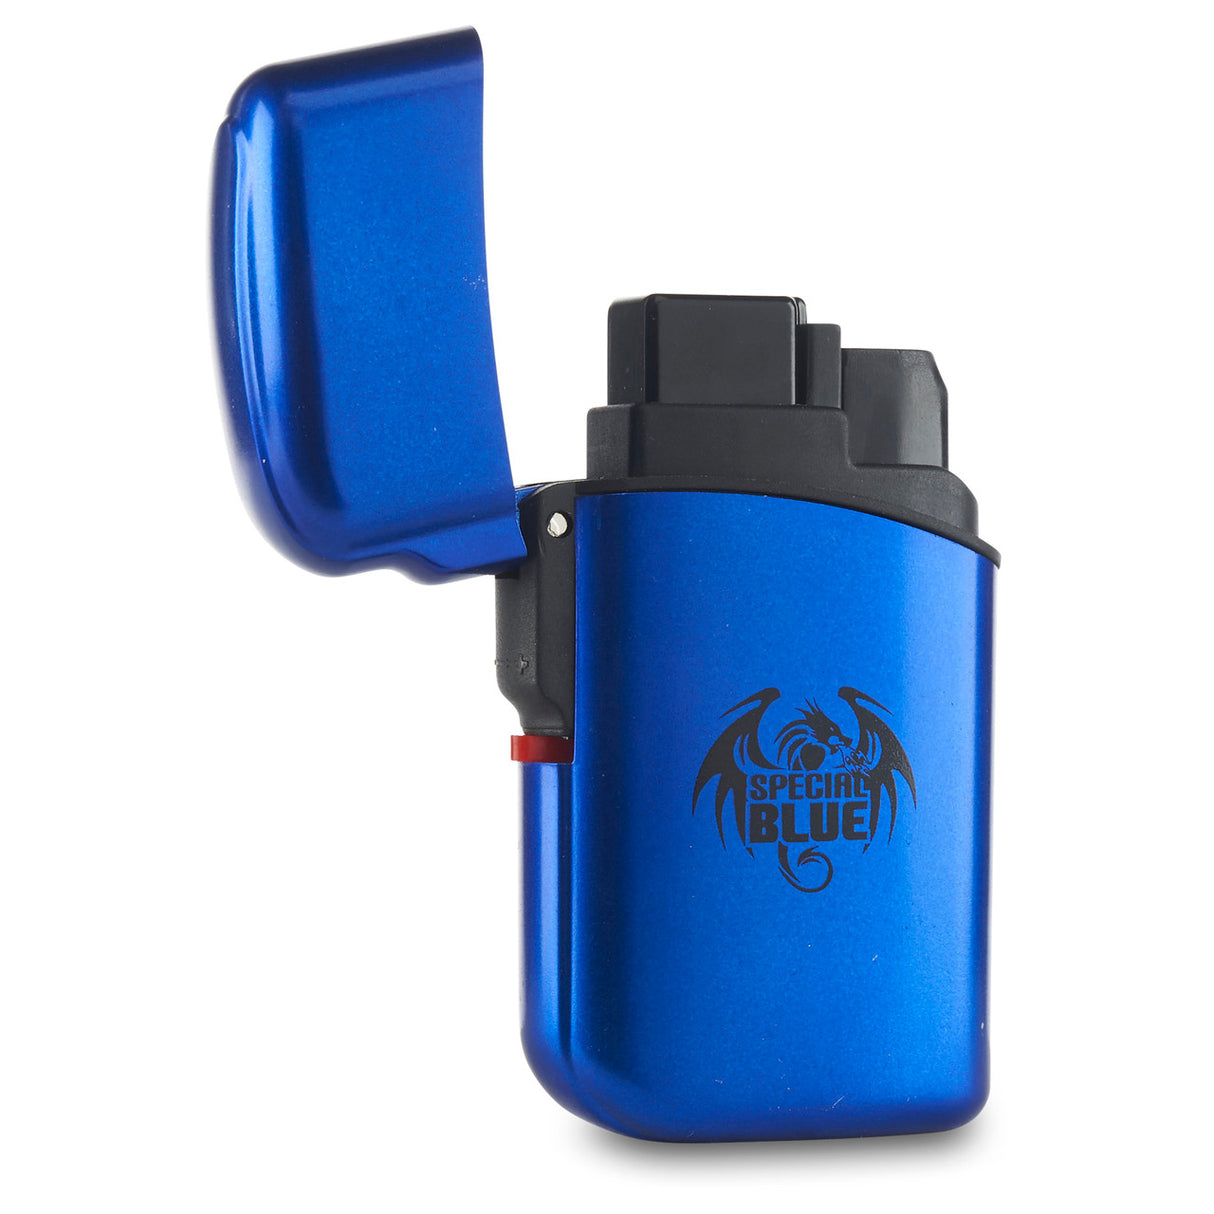 classic metal single jet flame special blue torch lighter